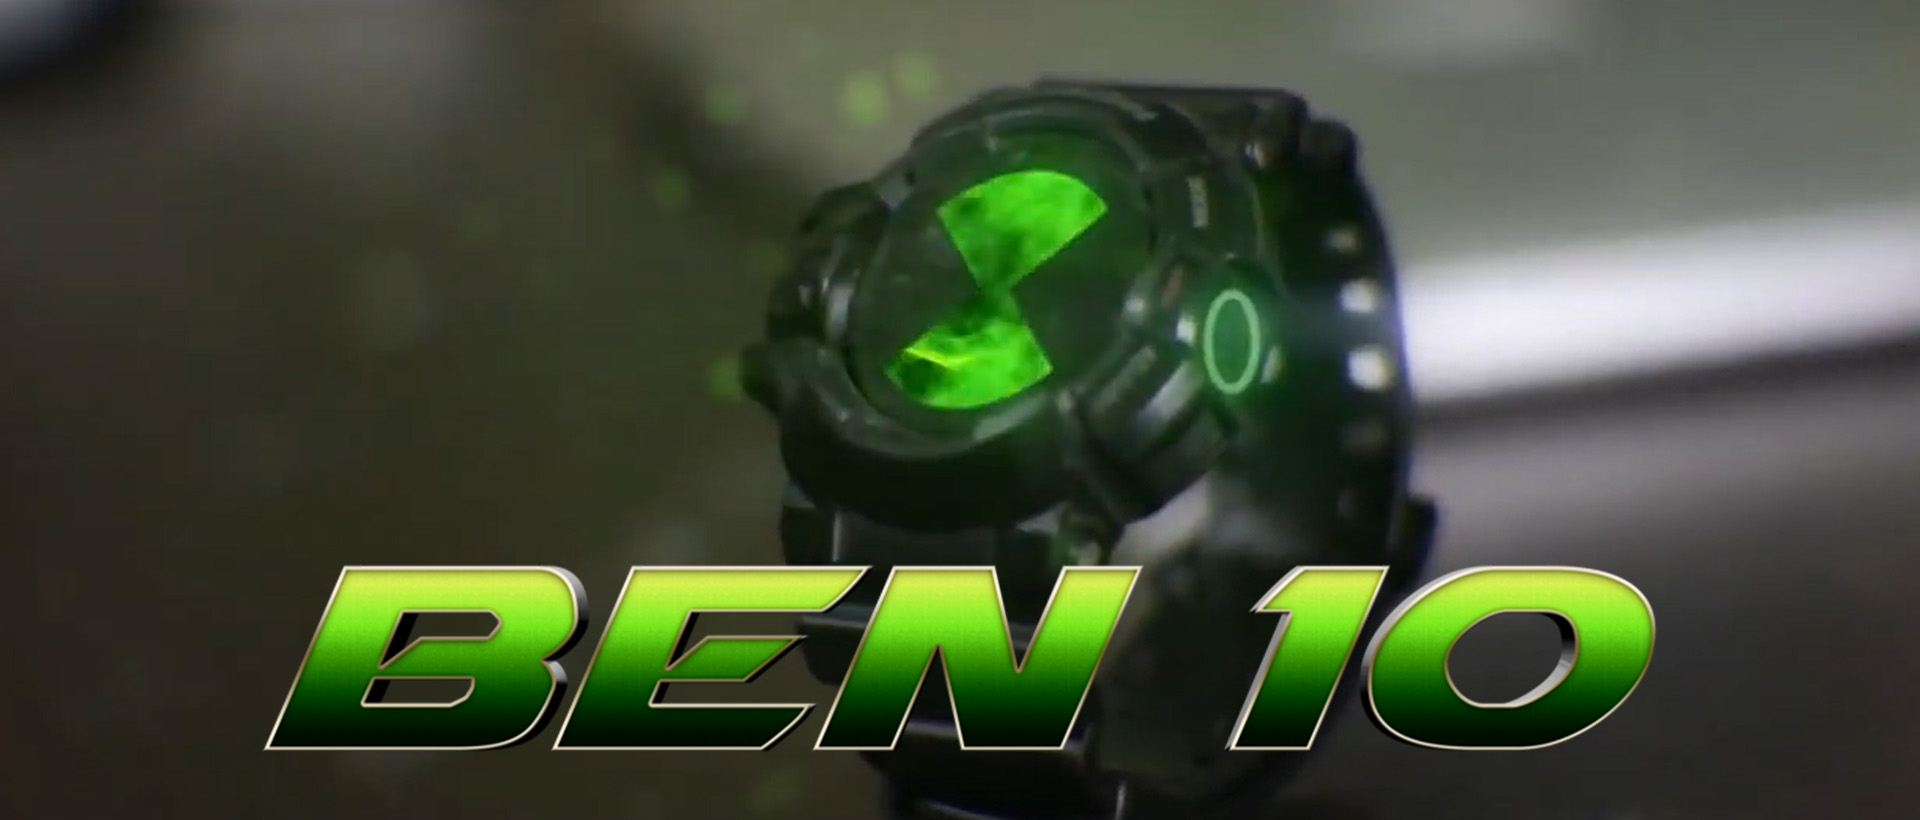 Warner Brothers Considering Making A 'Ben 10' Live-Action Movie - Knight  Edge Media